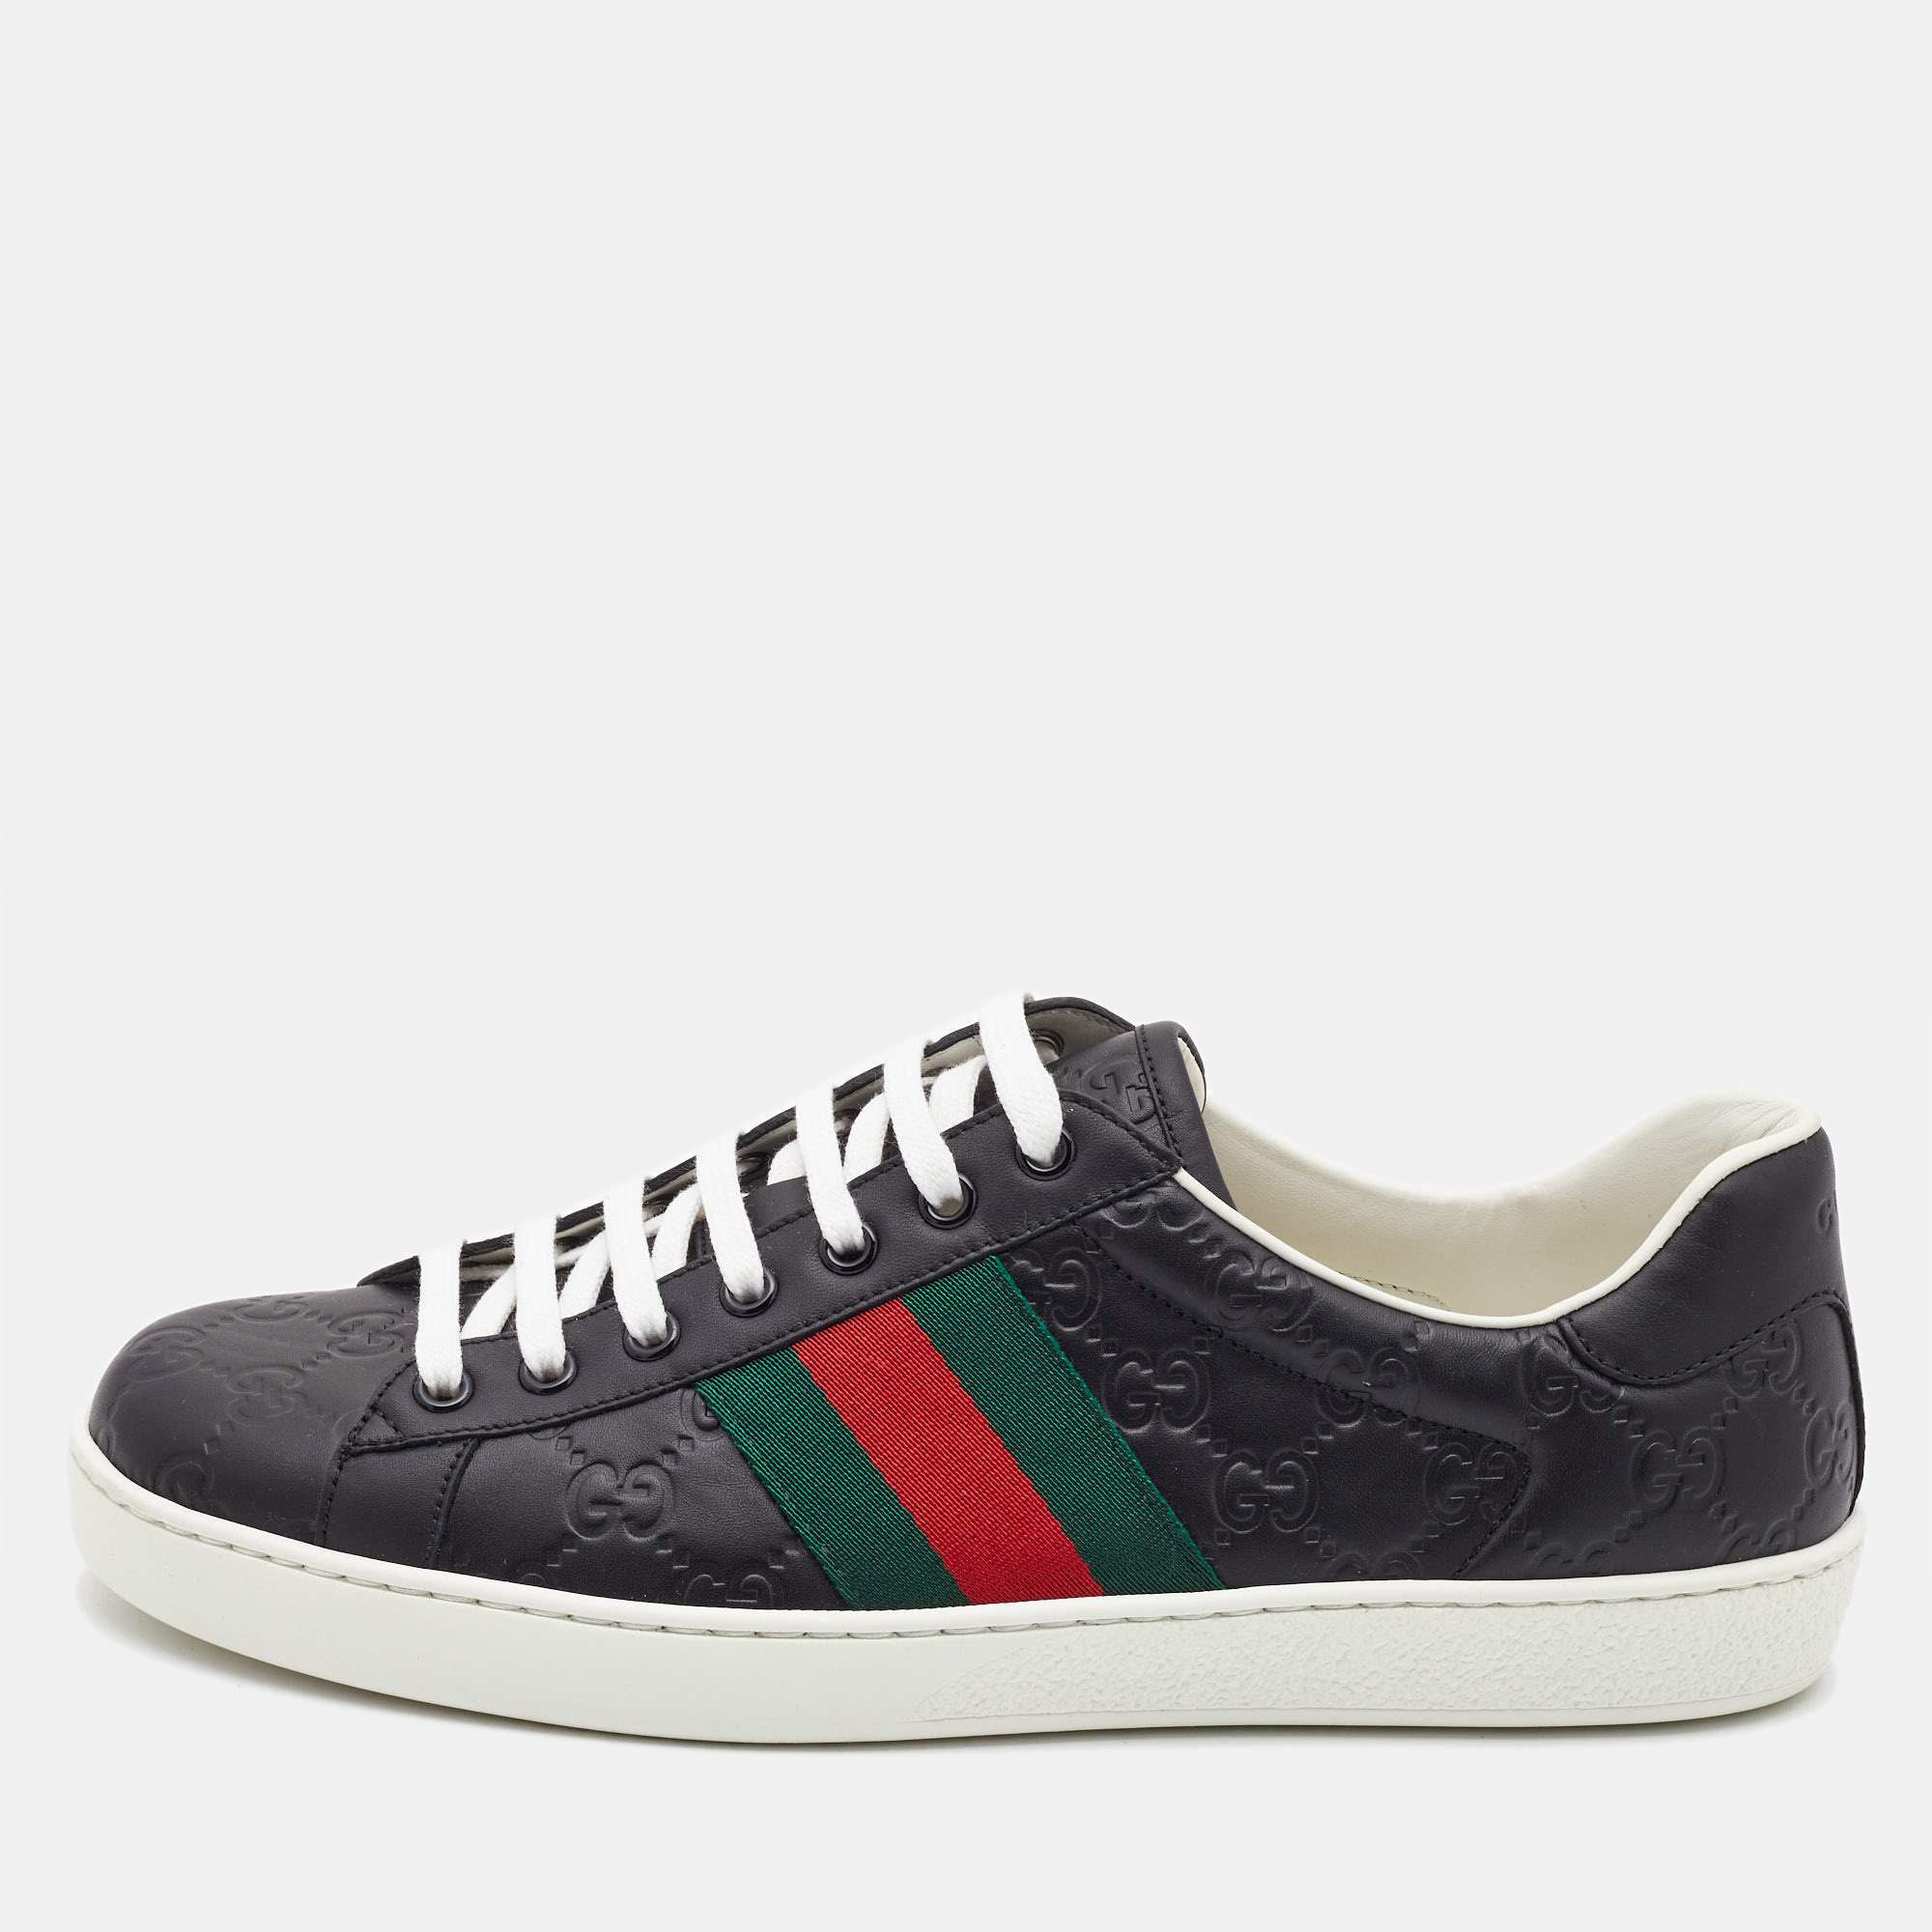 Gucci Black Guccissima Leather Web Detail Ace Sneakers Size 42.5